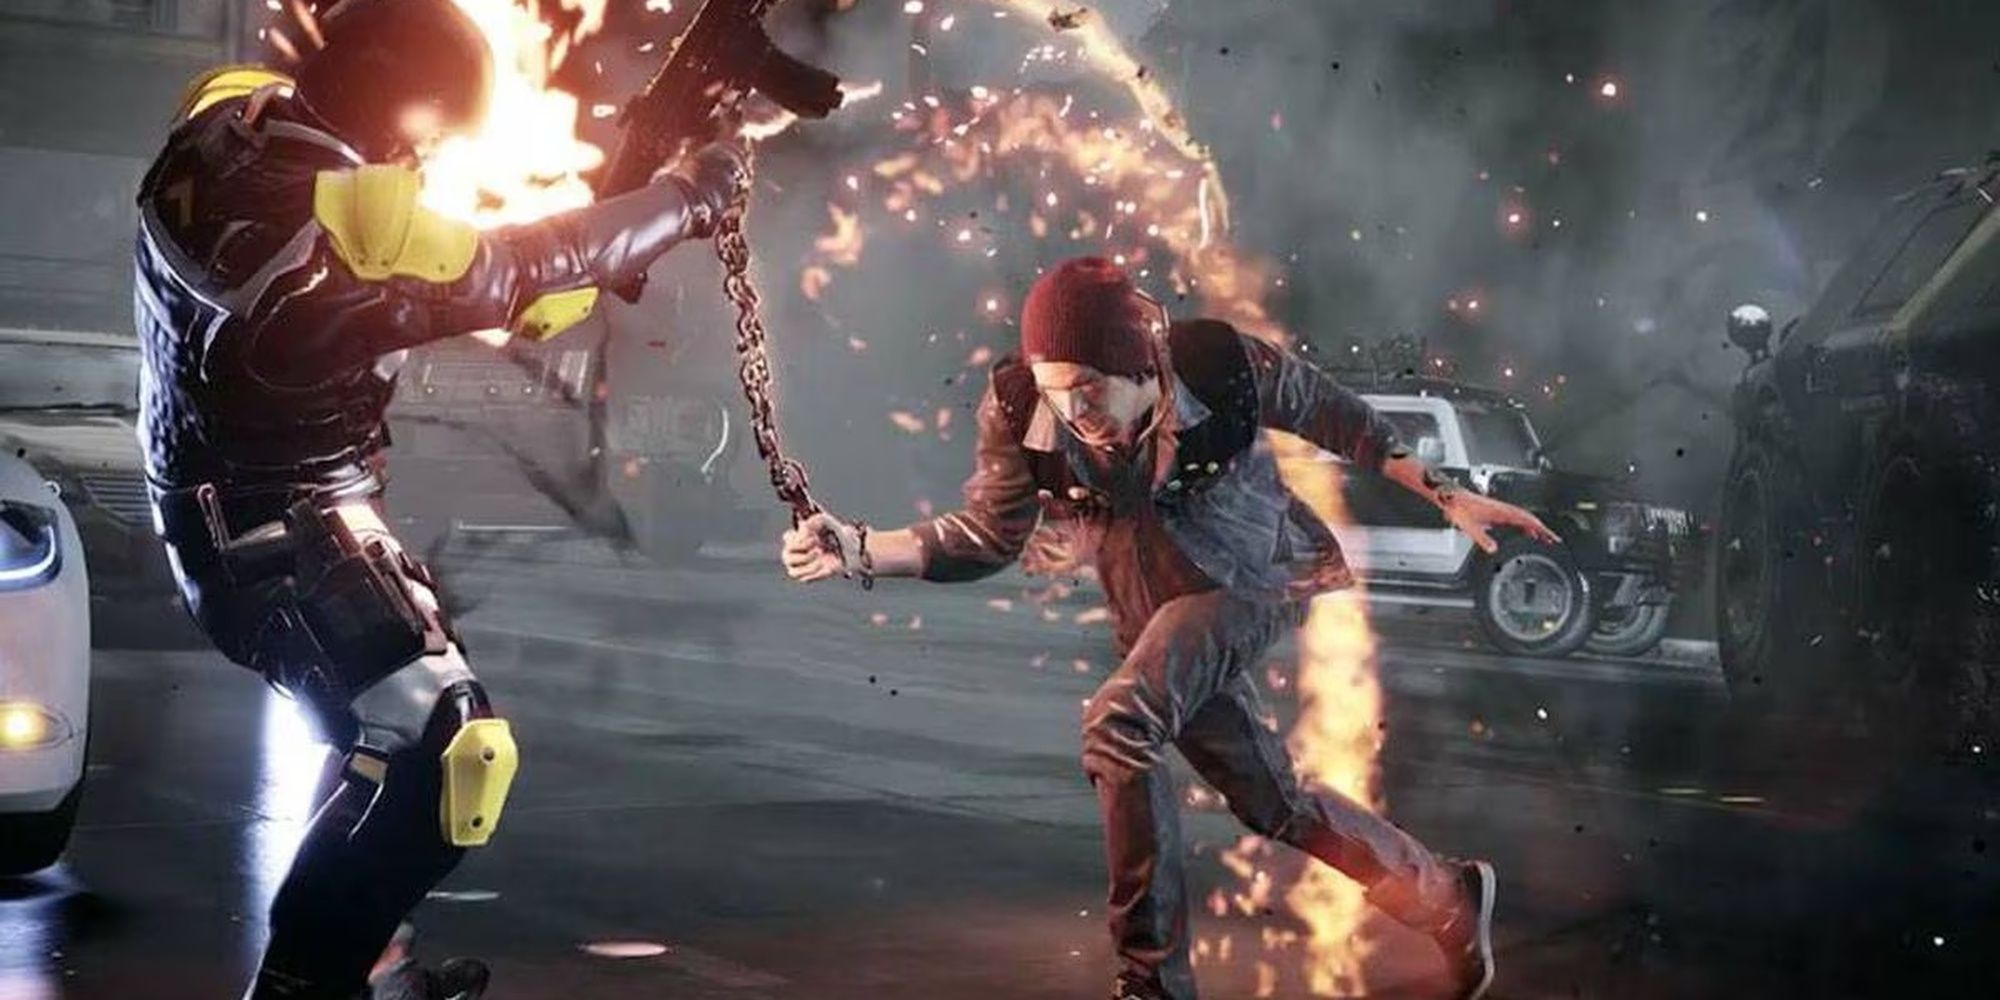 Infamous: Second Son - Delsin Attacking An Enforcer With His Fire Chain